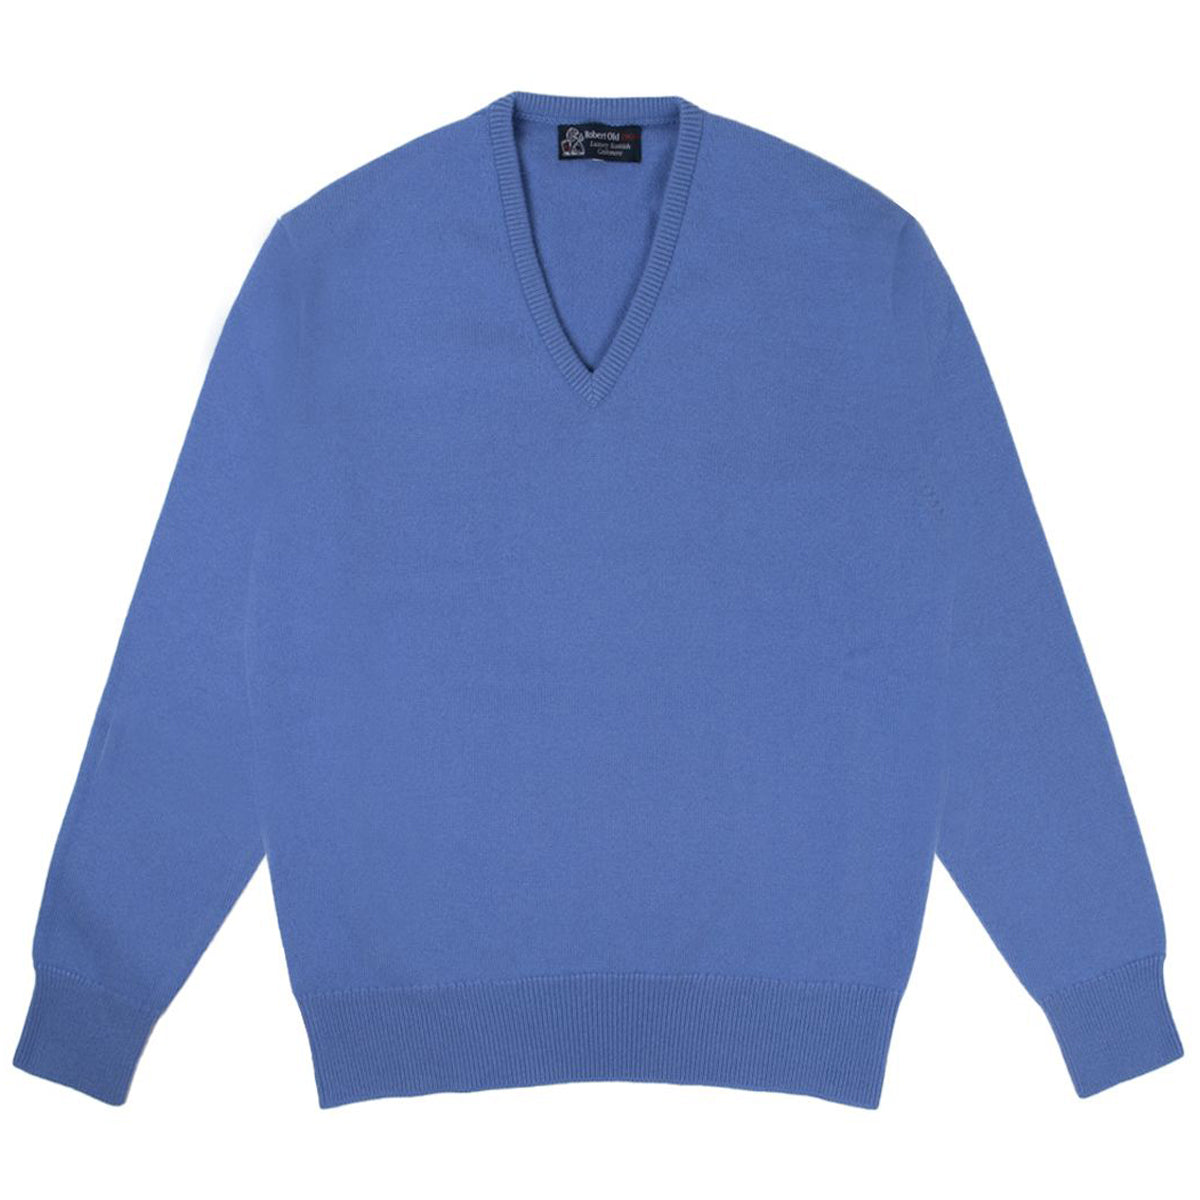 Isfahan Blue Tobermorey 4ply V-Neck Cashmere Sweater  Robert Old   